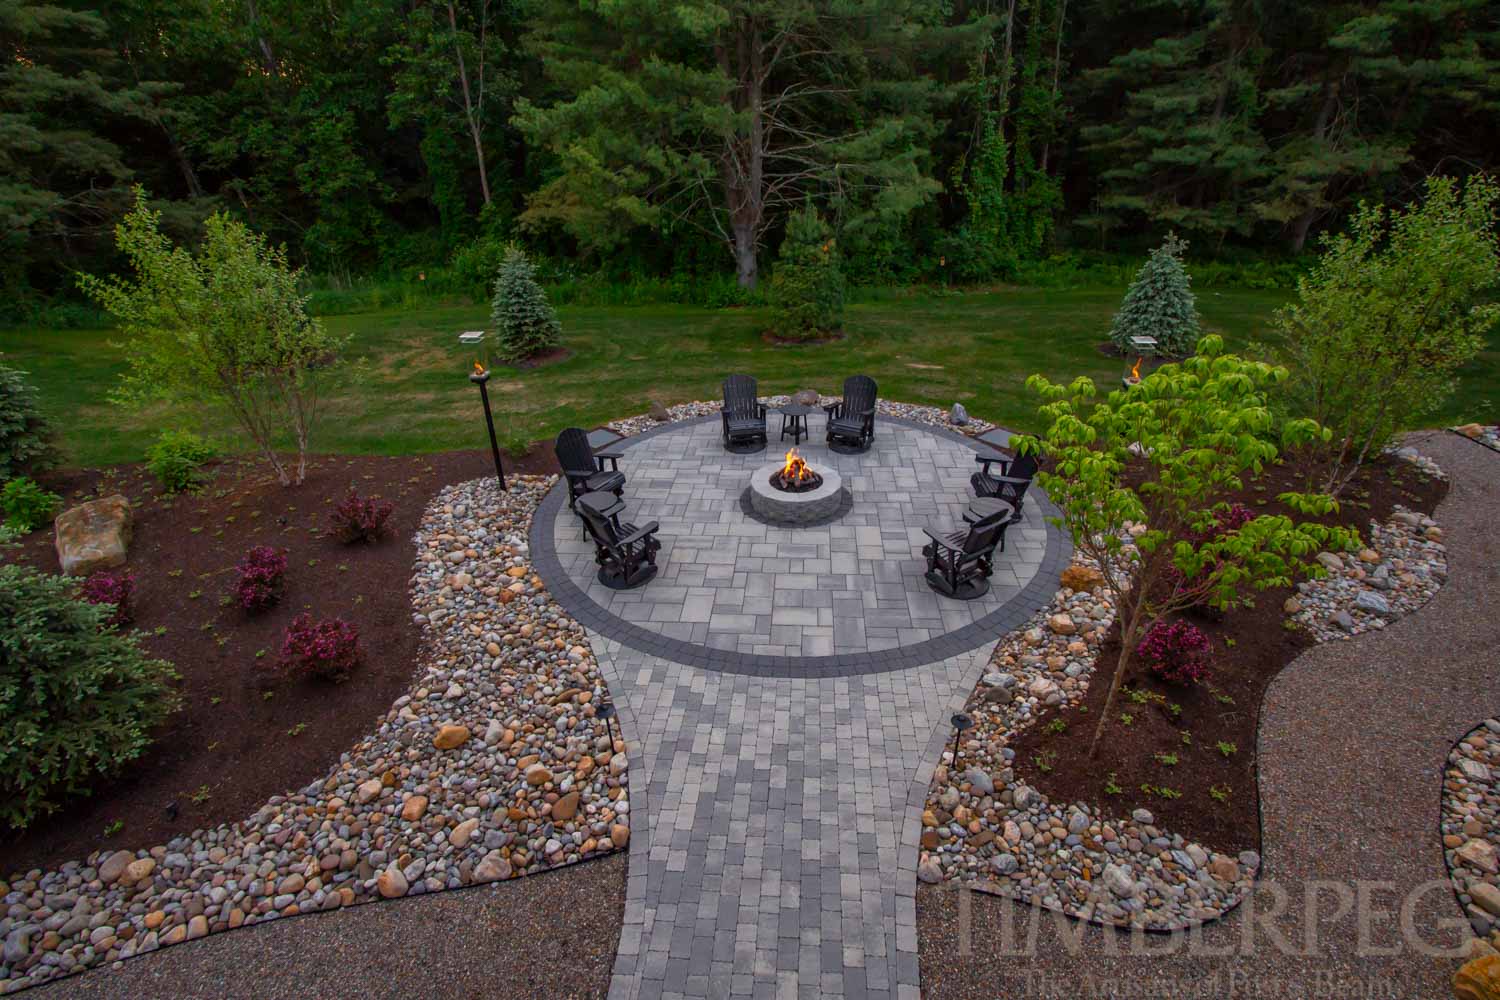 Clifton Park NY - Van Patten Golf Club (T01003) aerial view of fire pit and patio